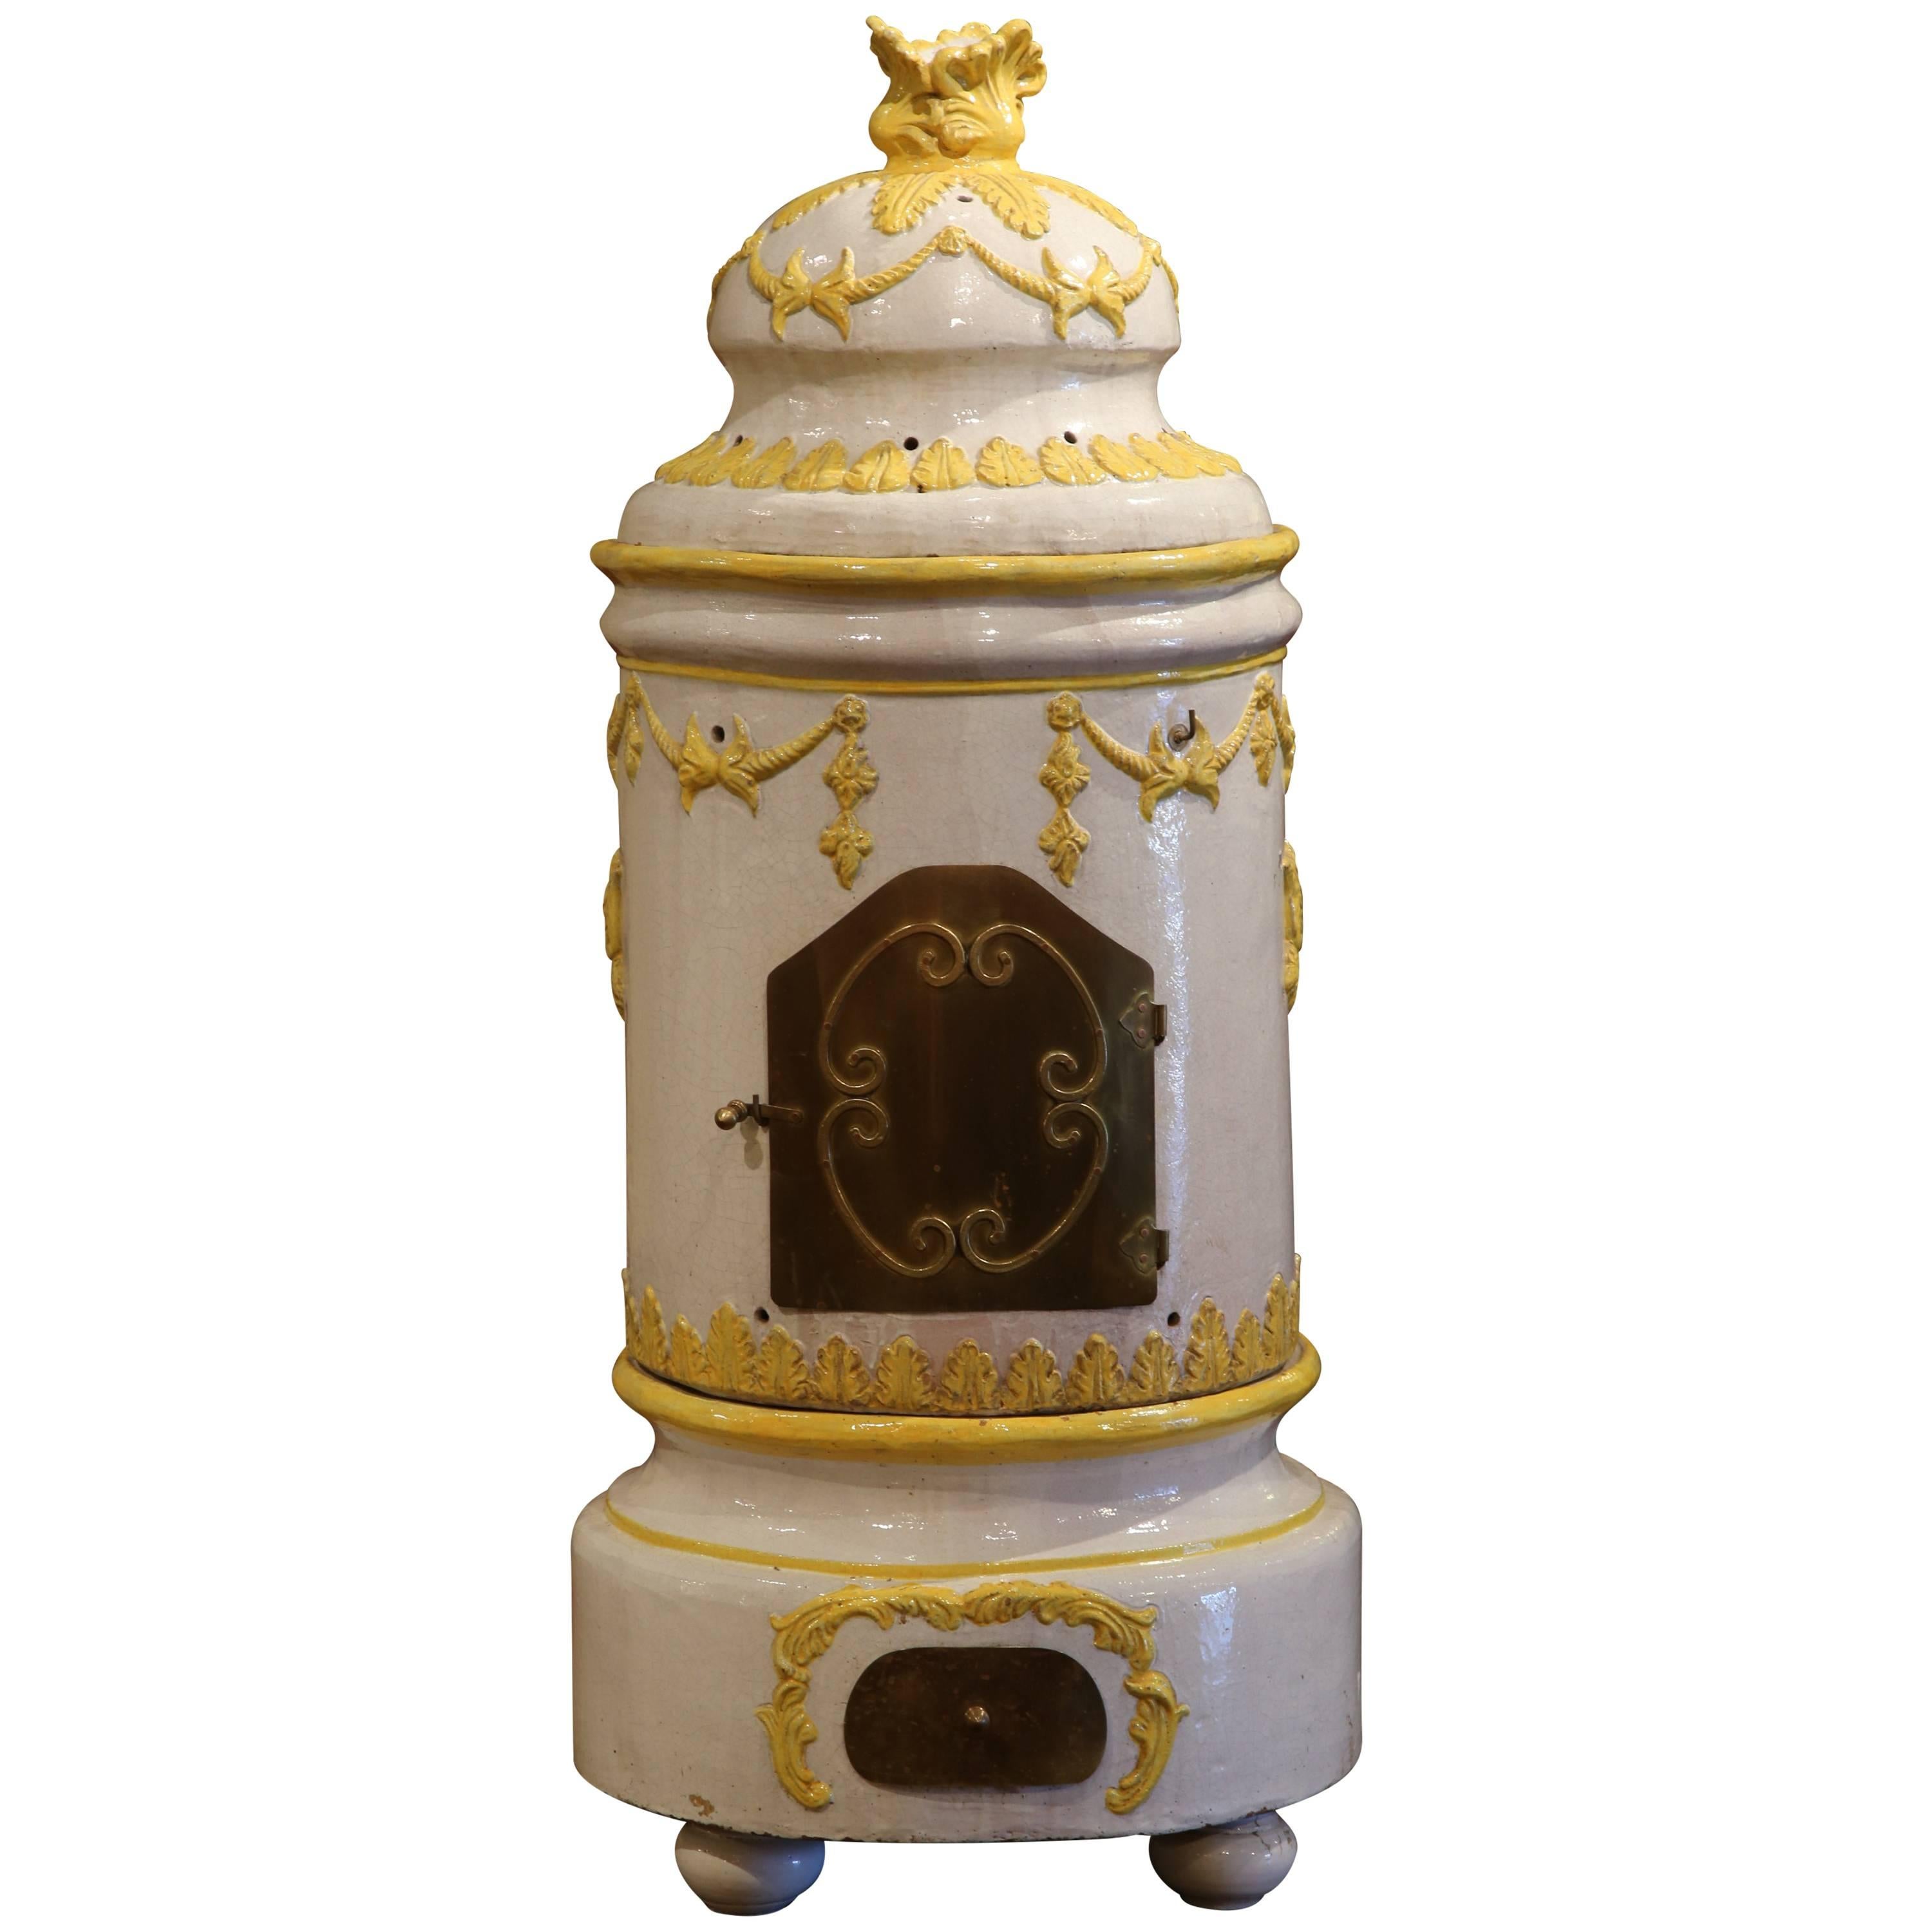 19th Century French White and Yellow Terracotta and Brass Wood Burning Stove